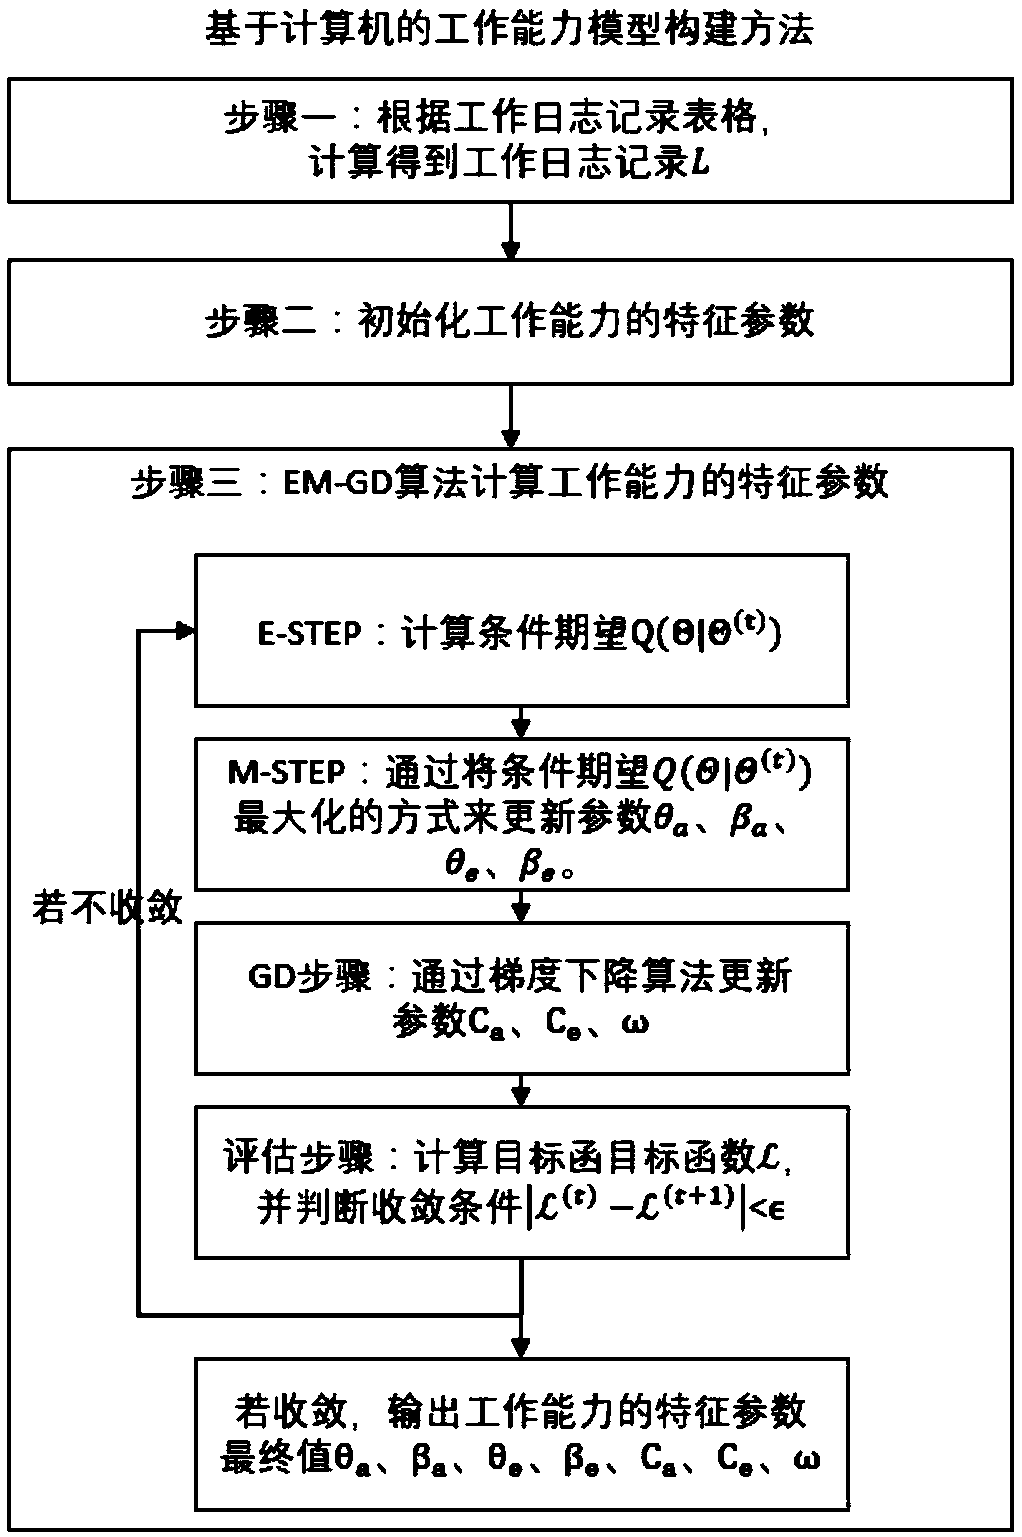 Method for constructing work ability model, parameter calculation method thereof, and labor force evaluation and prediction device based on the model